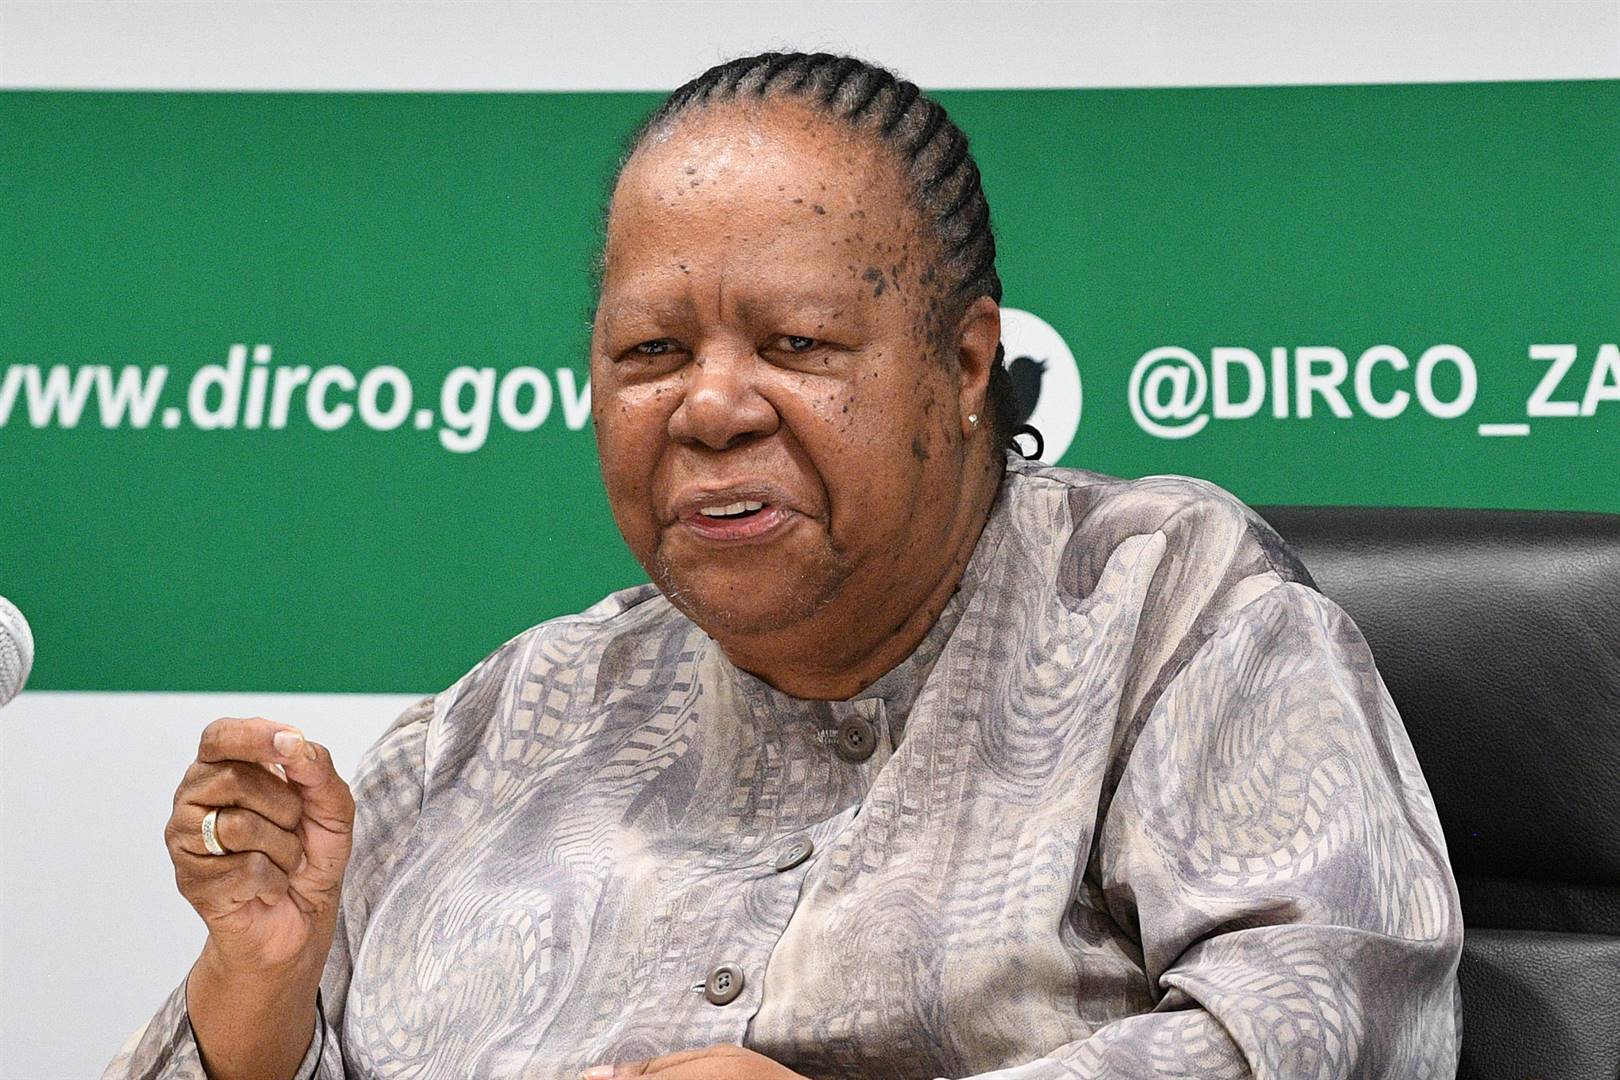 Naledi Pandor can try all she likes to convince the Yanks that we are not hostile to them, writes Mondli Makhanya